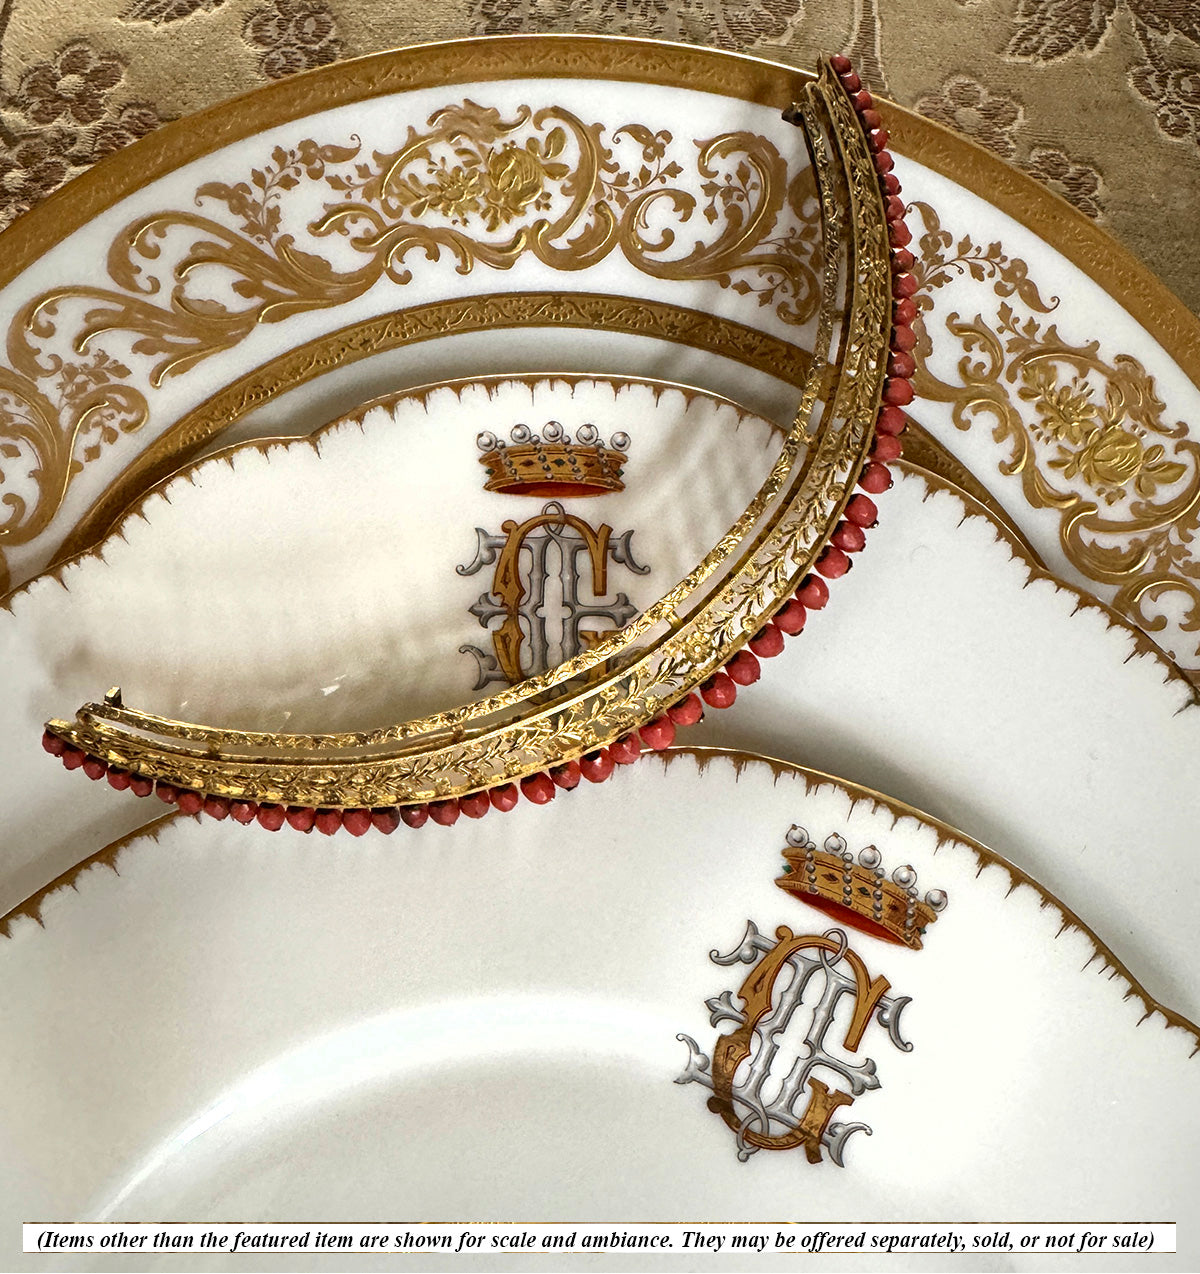 PAIR of Antique French Porcelain Hand Painted Dessert or Salad Plates, Jeweled Crown Monogram